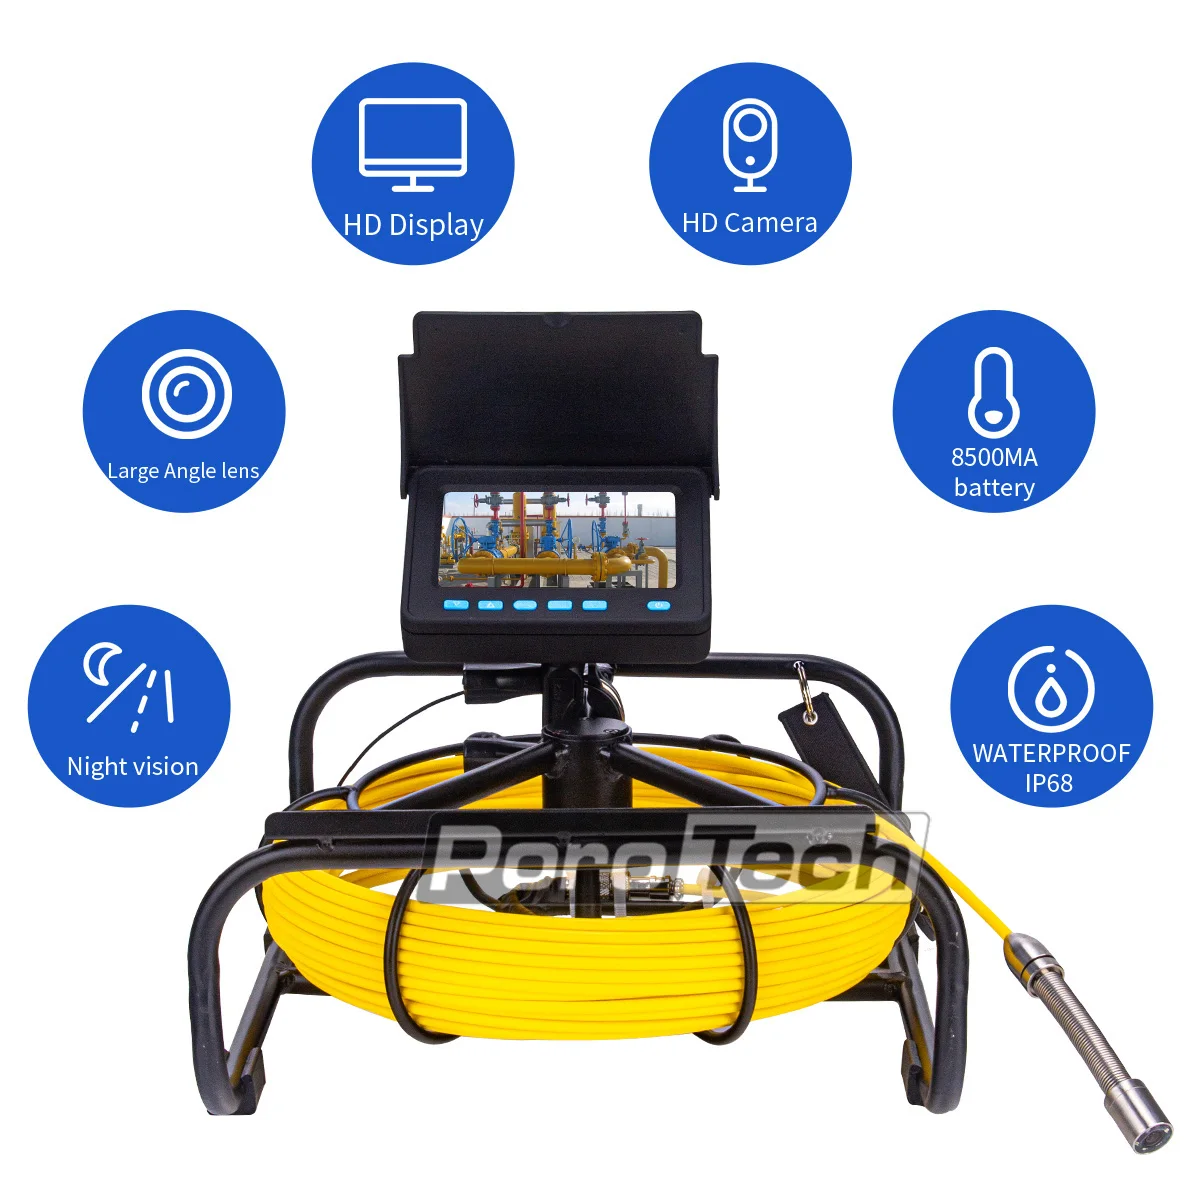 Newest 4.3inch endoscope pipeline camera detection cable waterproof pipeline inspection system waterproof drain sewer cam WP9604 makerppi 3d printer fully enclosed laser engraving 4 3inch color touch screen self developed circuit board firmware system